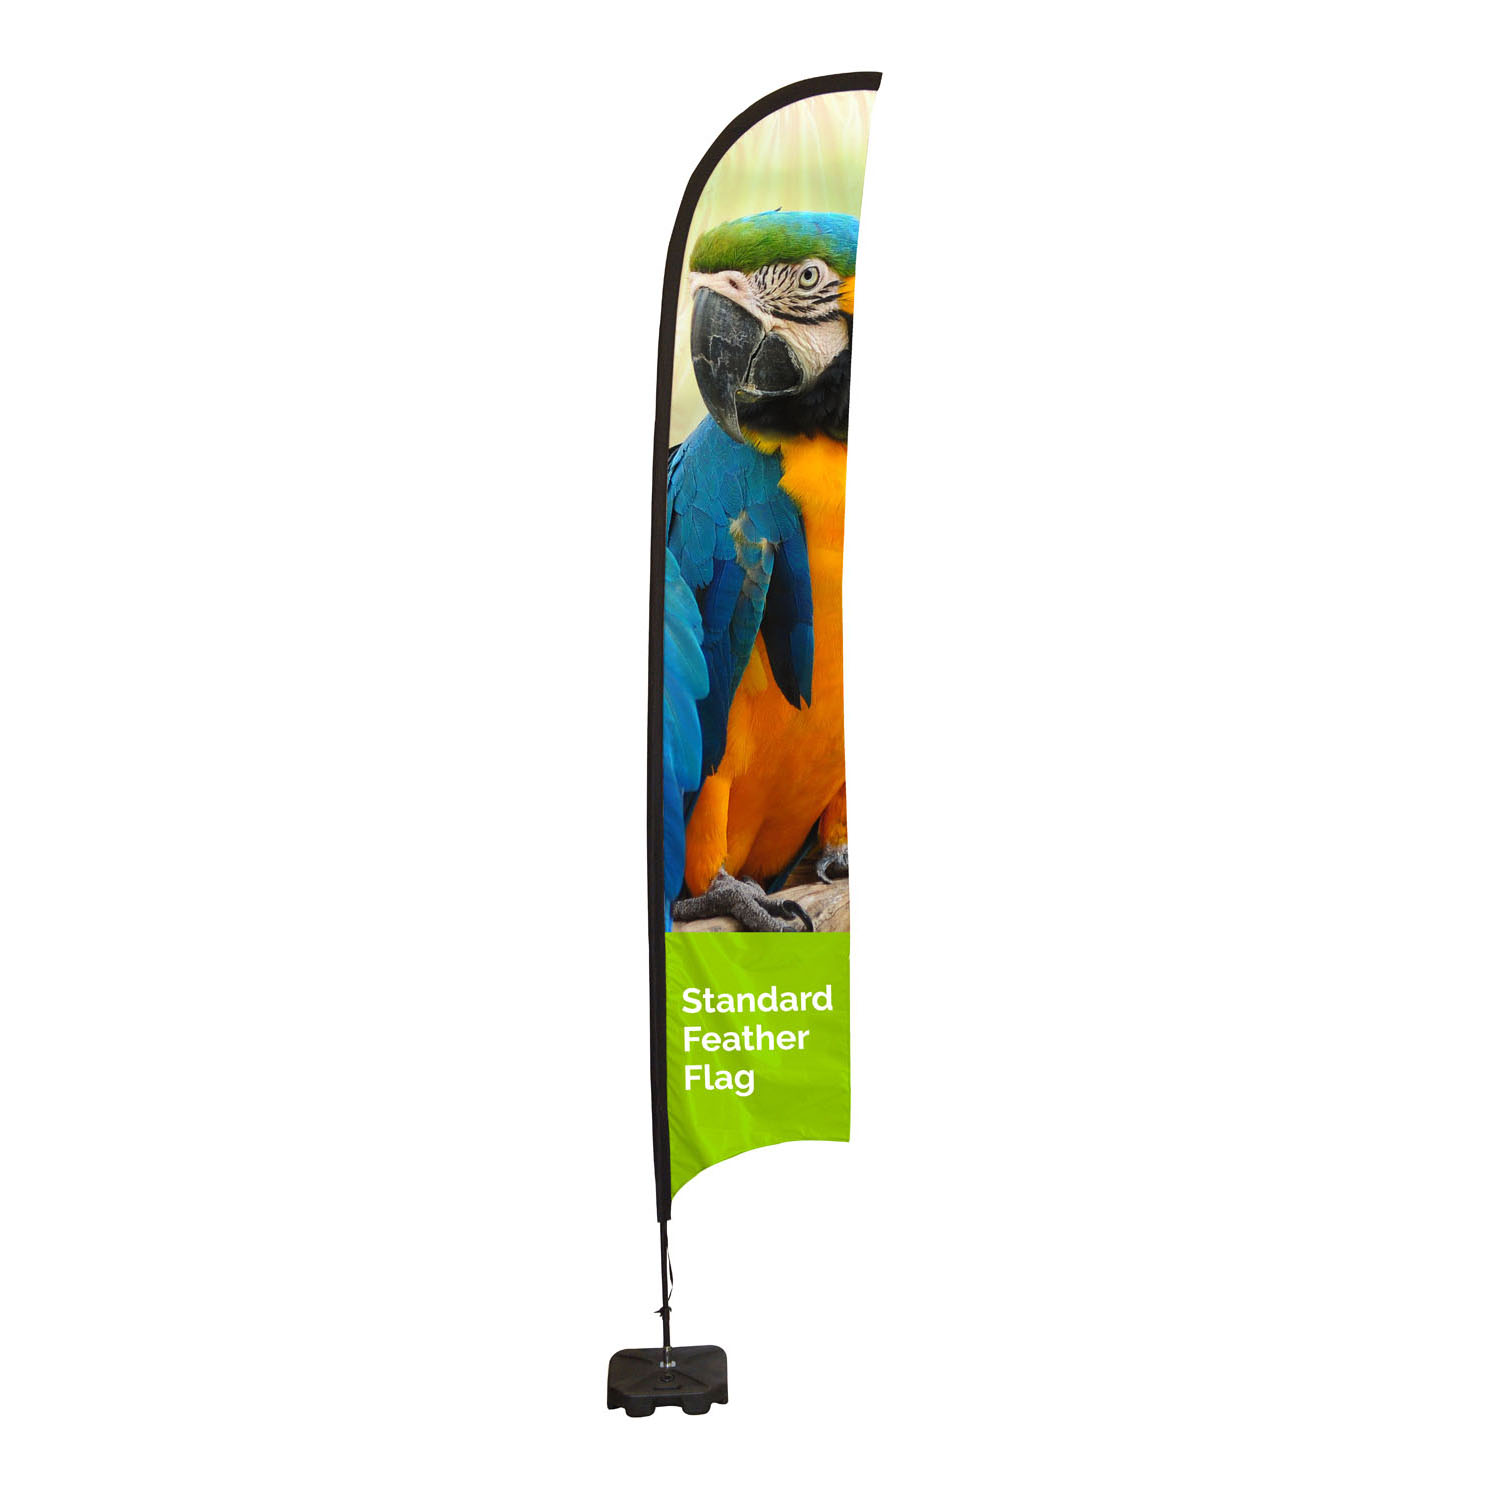 Standard Feather Flags - The Big Display Company